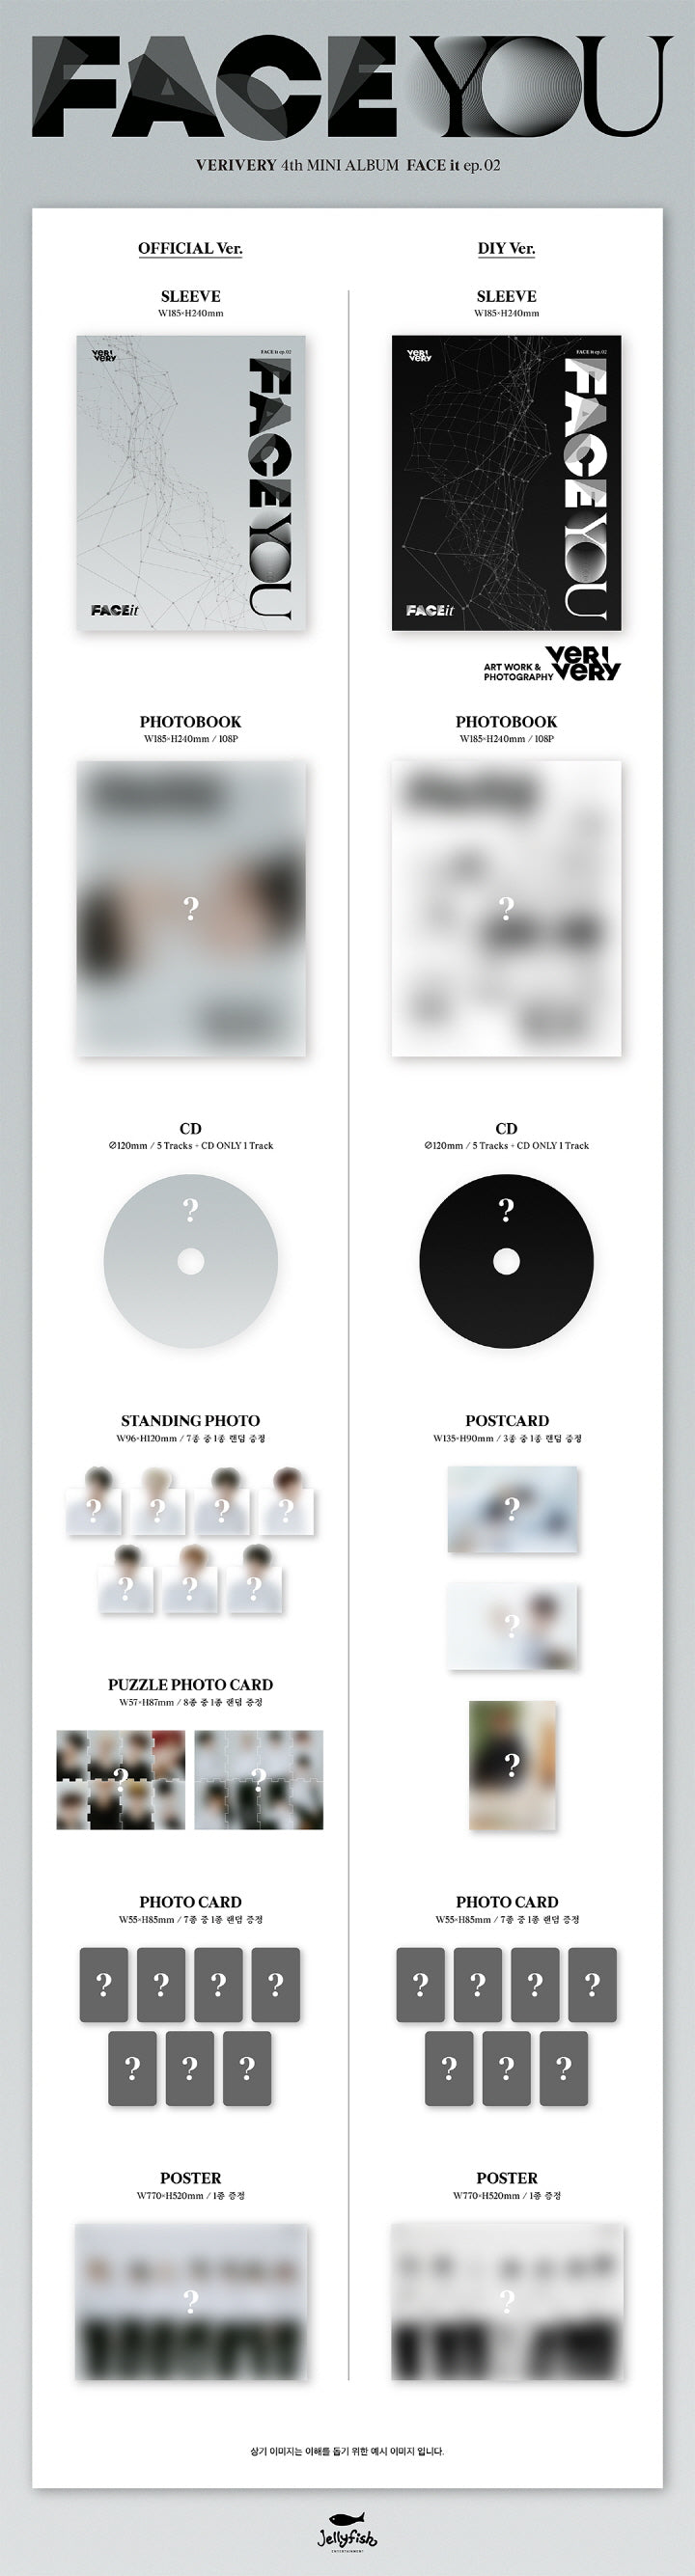 1 CD
1 Photo Book (108 pages)
1 Postcard (random out of 3 types)
1 Photo Card (random out of 7 types)